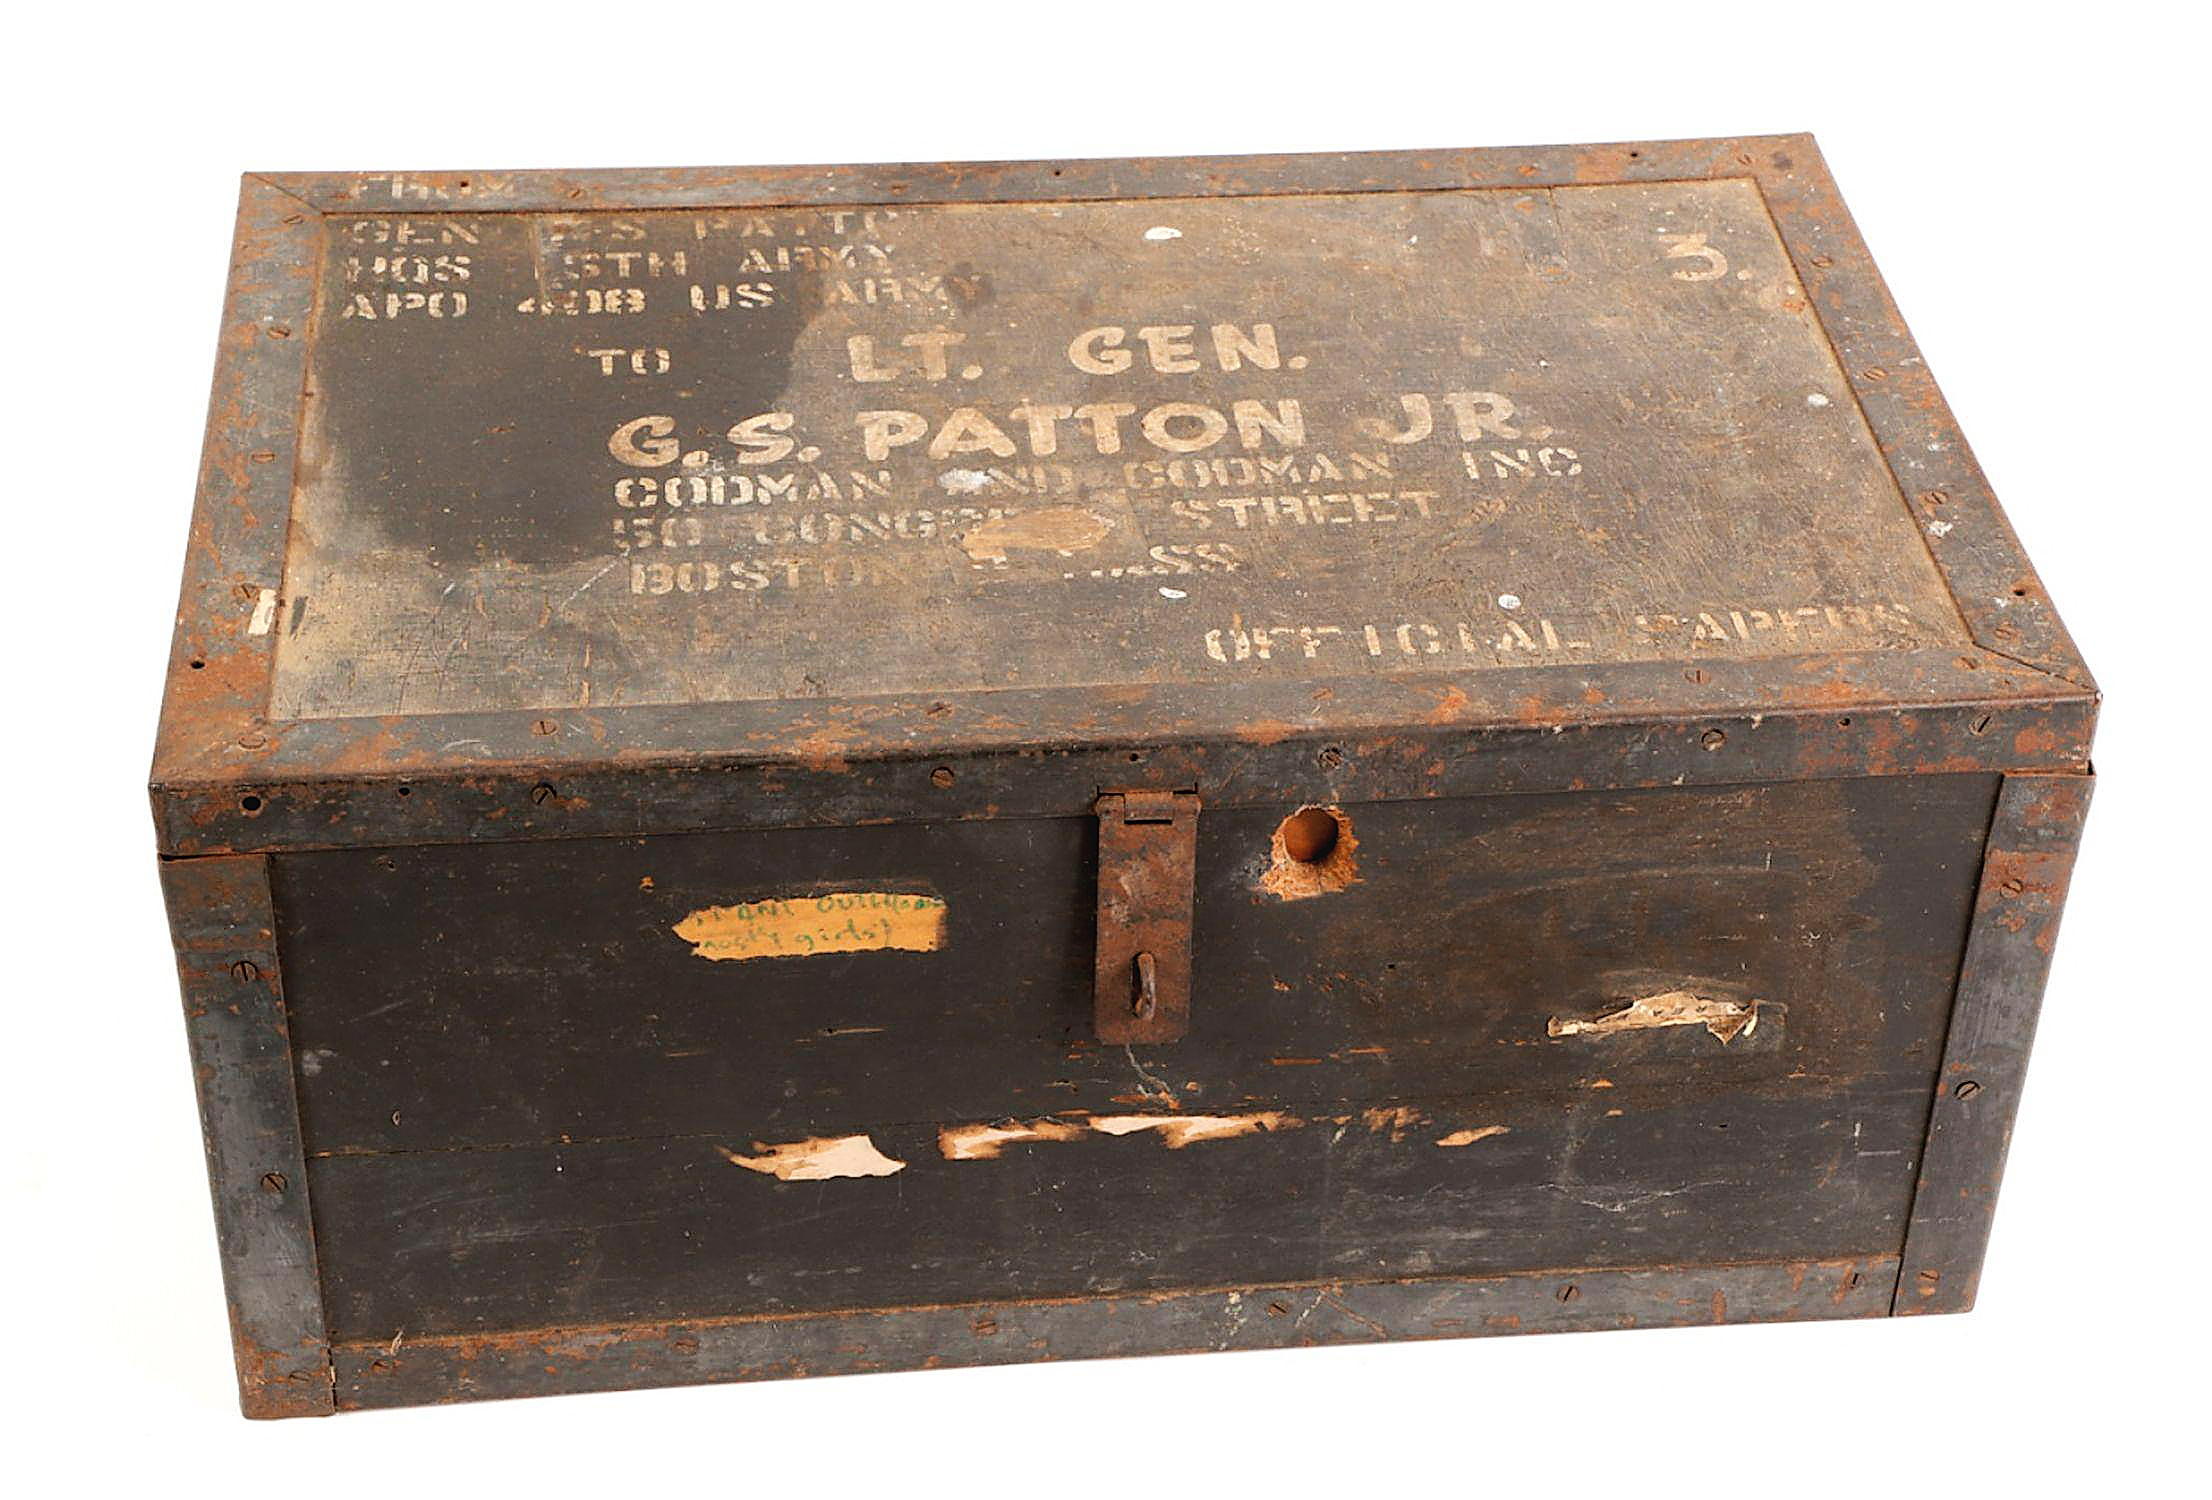 Sold at Auction: Military foot locker